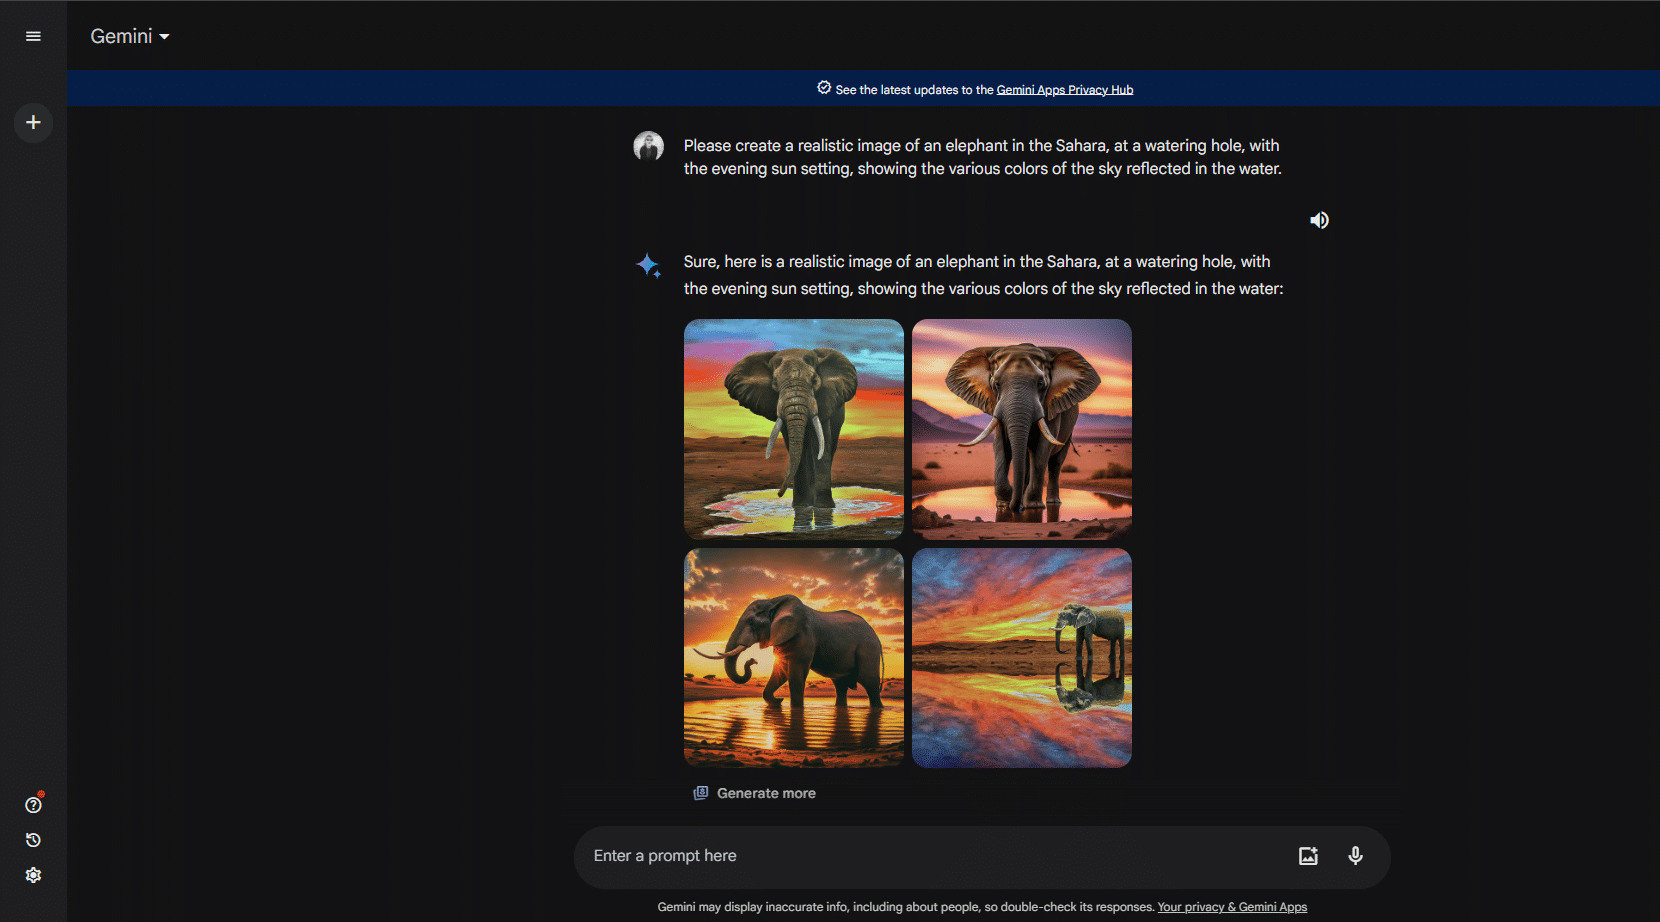 Four different images on the Gemini results screen after requesting an image of an elephant standing at a watering hole at sunset.